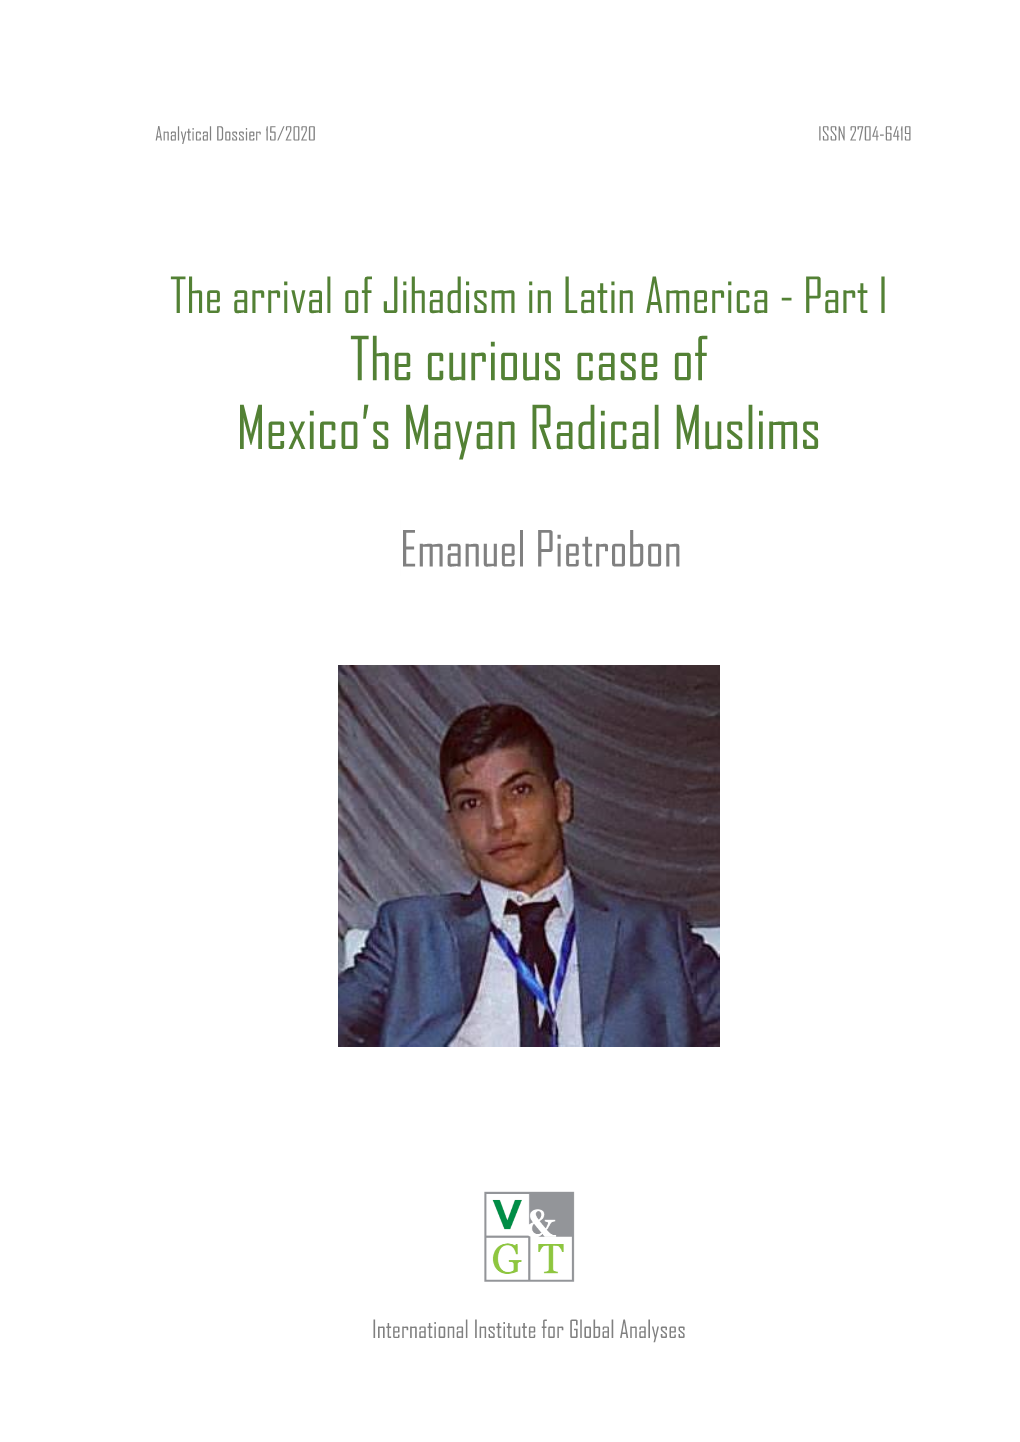 The Curious Case of Mexico's Mayan Radical Muslims